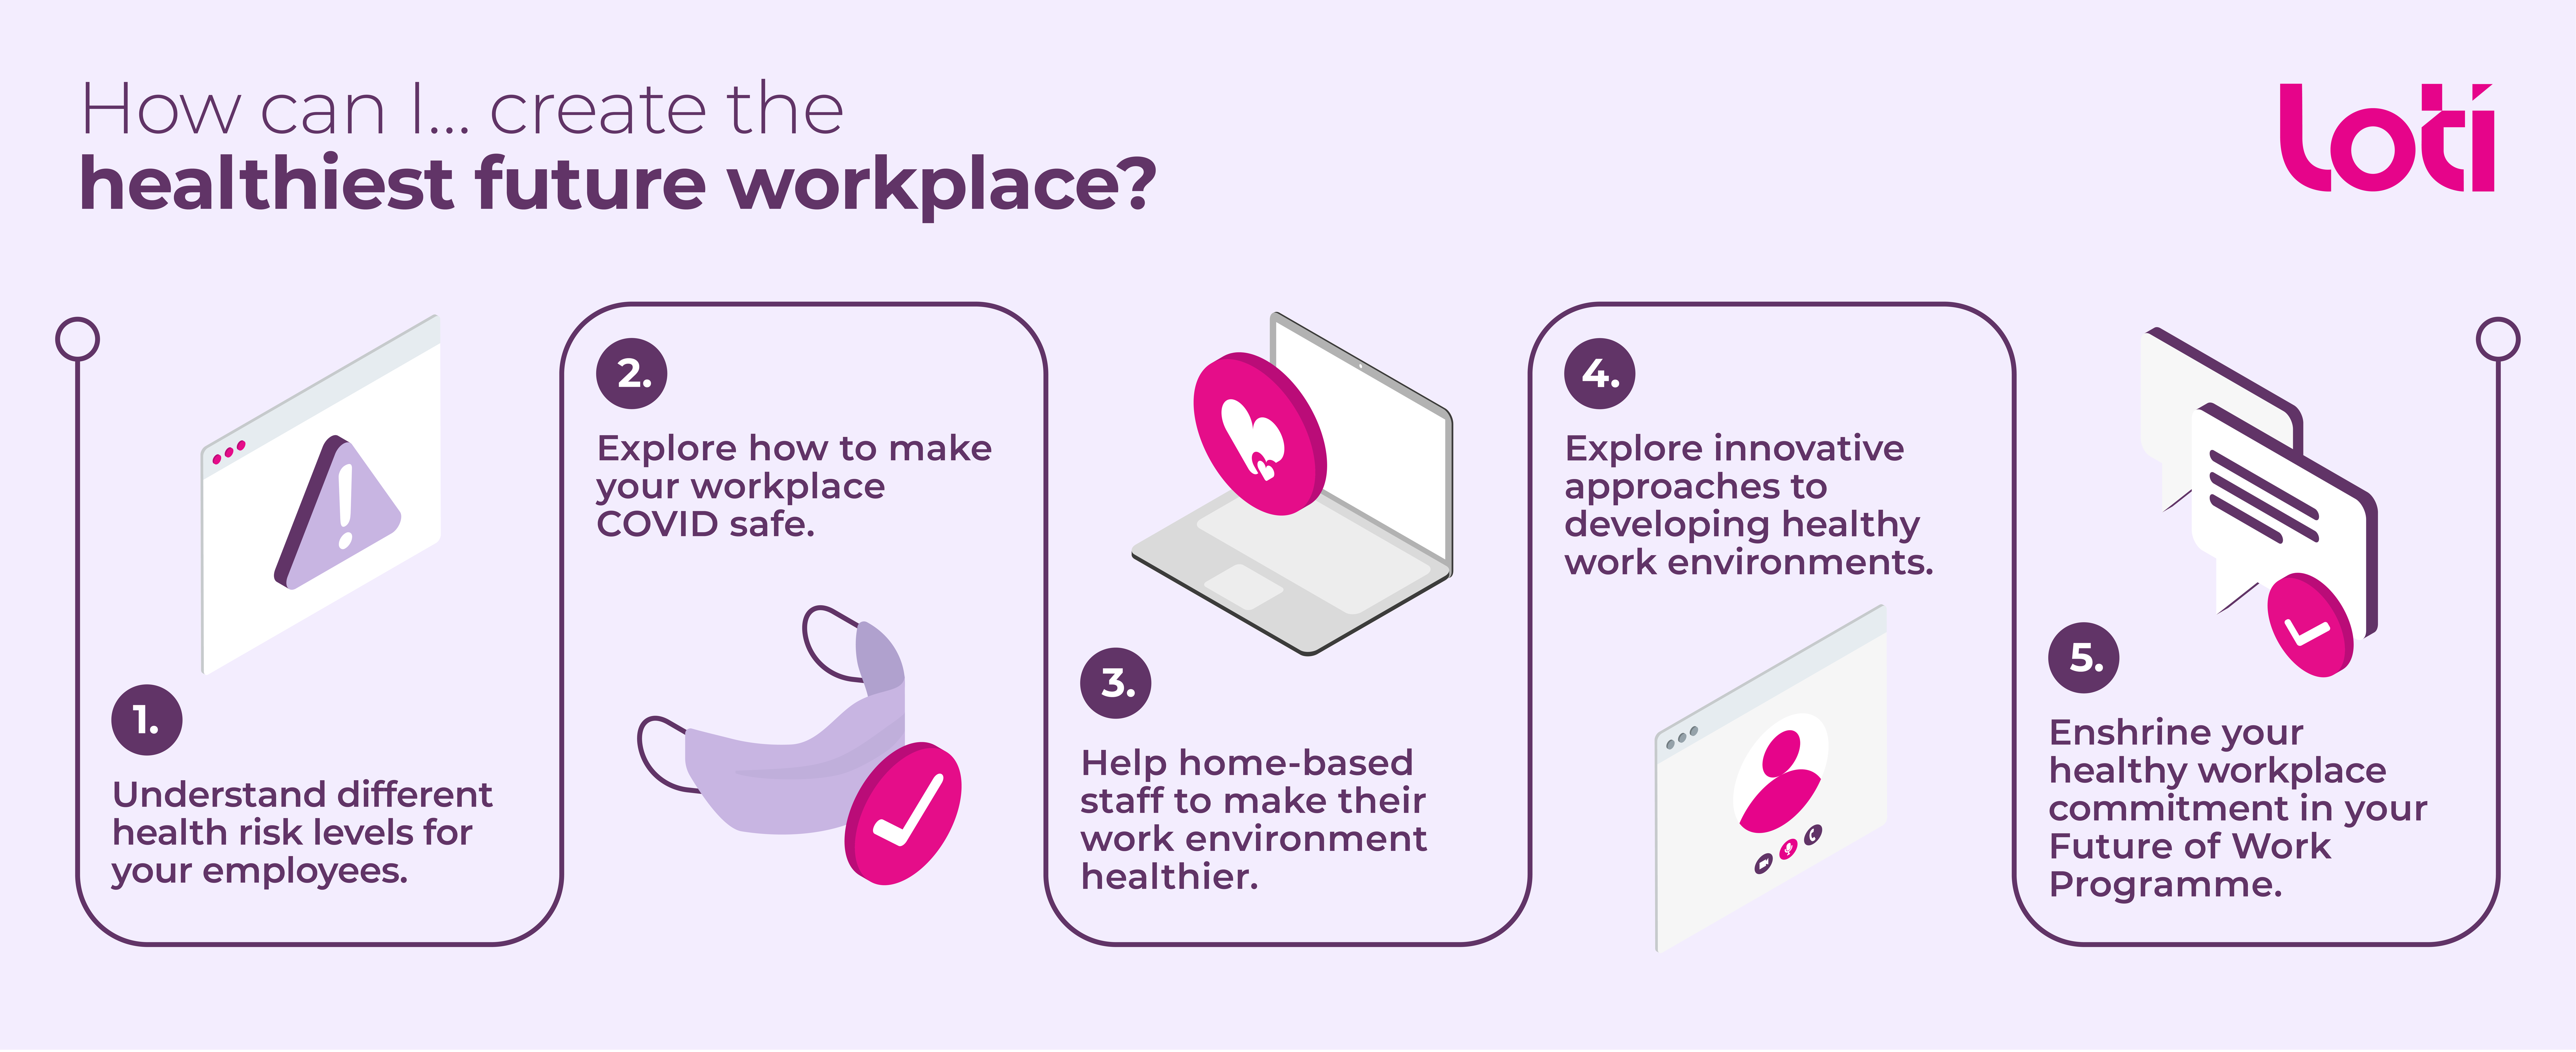 An infographic illustrating How can I… create the healthiest future workplace? Which includes: Understand different health risk levels for your employees. Explore how to make your workplace COVID safe. Help home-based staff to make their work environment healthier. Explore innovative approaches to developing healthy work environments. Enshrine your healthy workplace commitment in your Future of Work Programme.